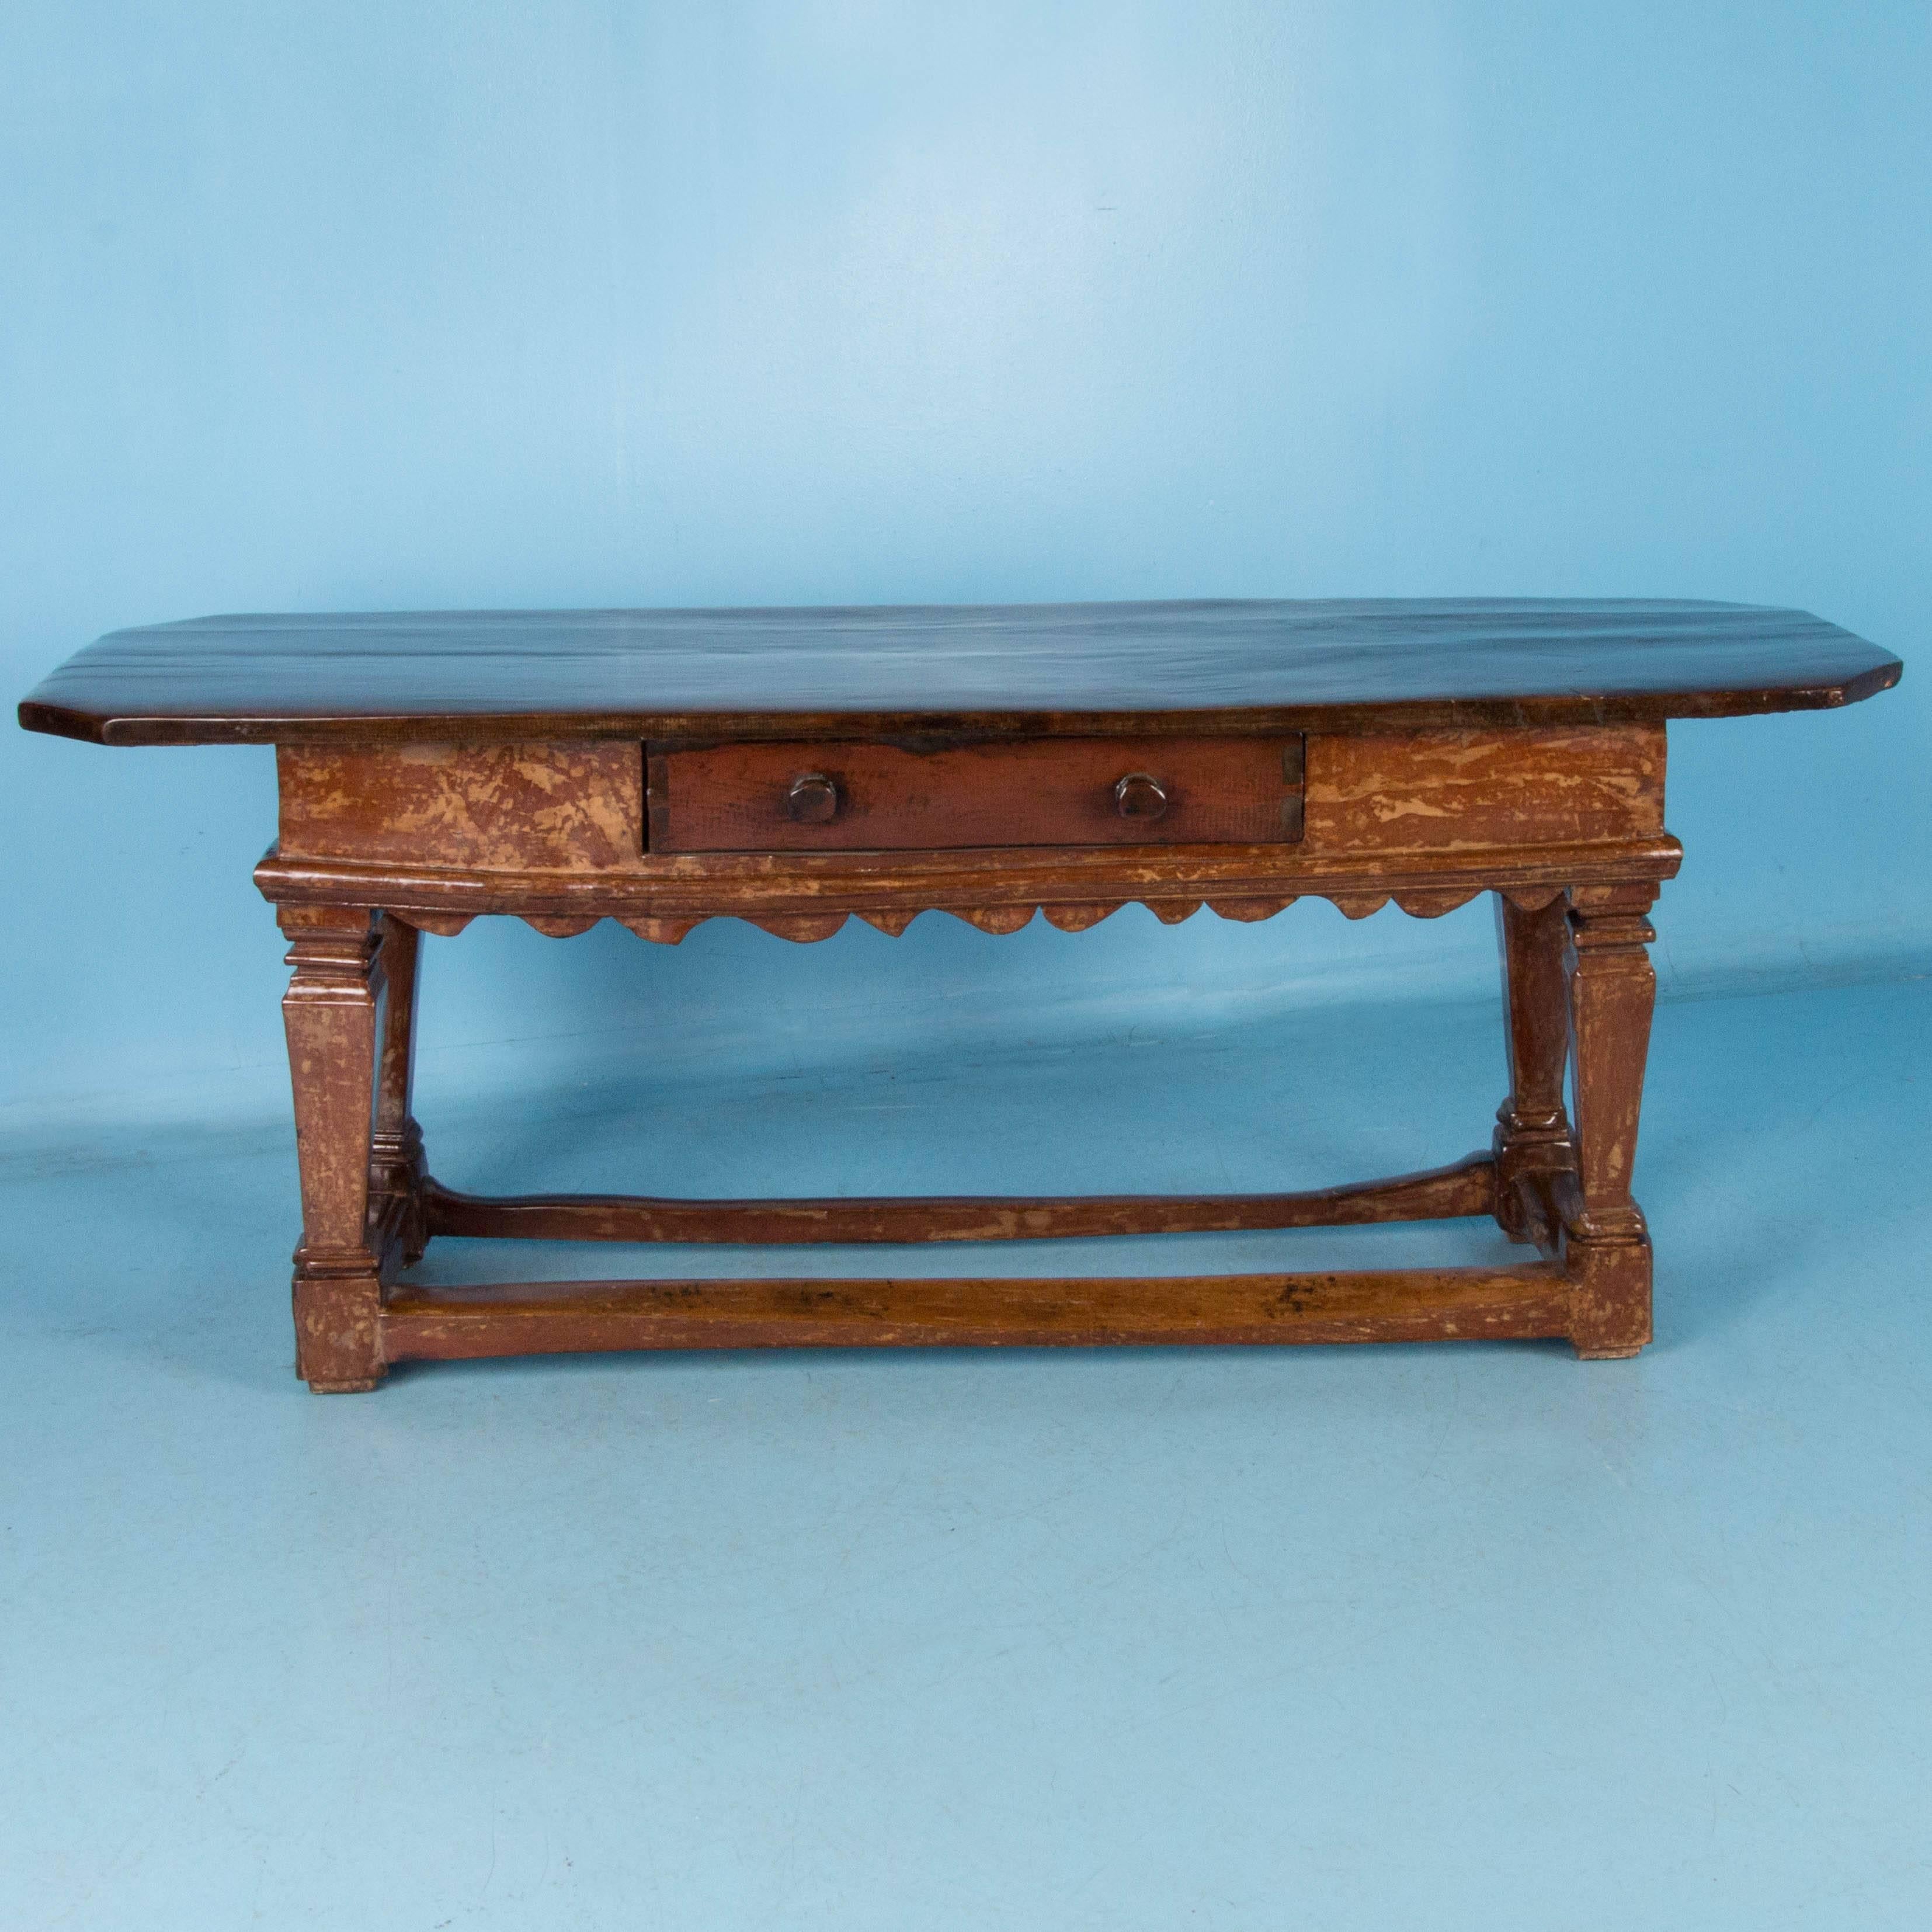 This console or work table from Denmark is solid oak with a gloss lacquered finish enhancing the remnants of old red paint. The four stretchers, connecting the tapered legs with block feet, are original and worn from over two centuries of use. The